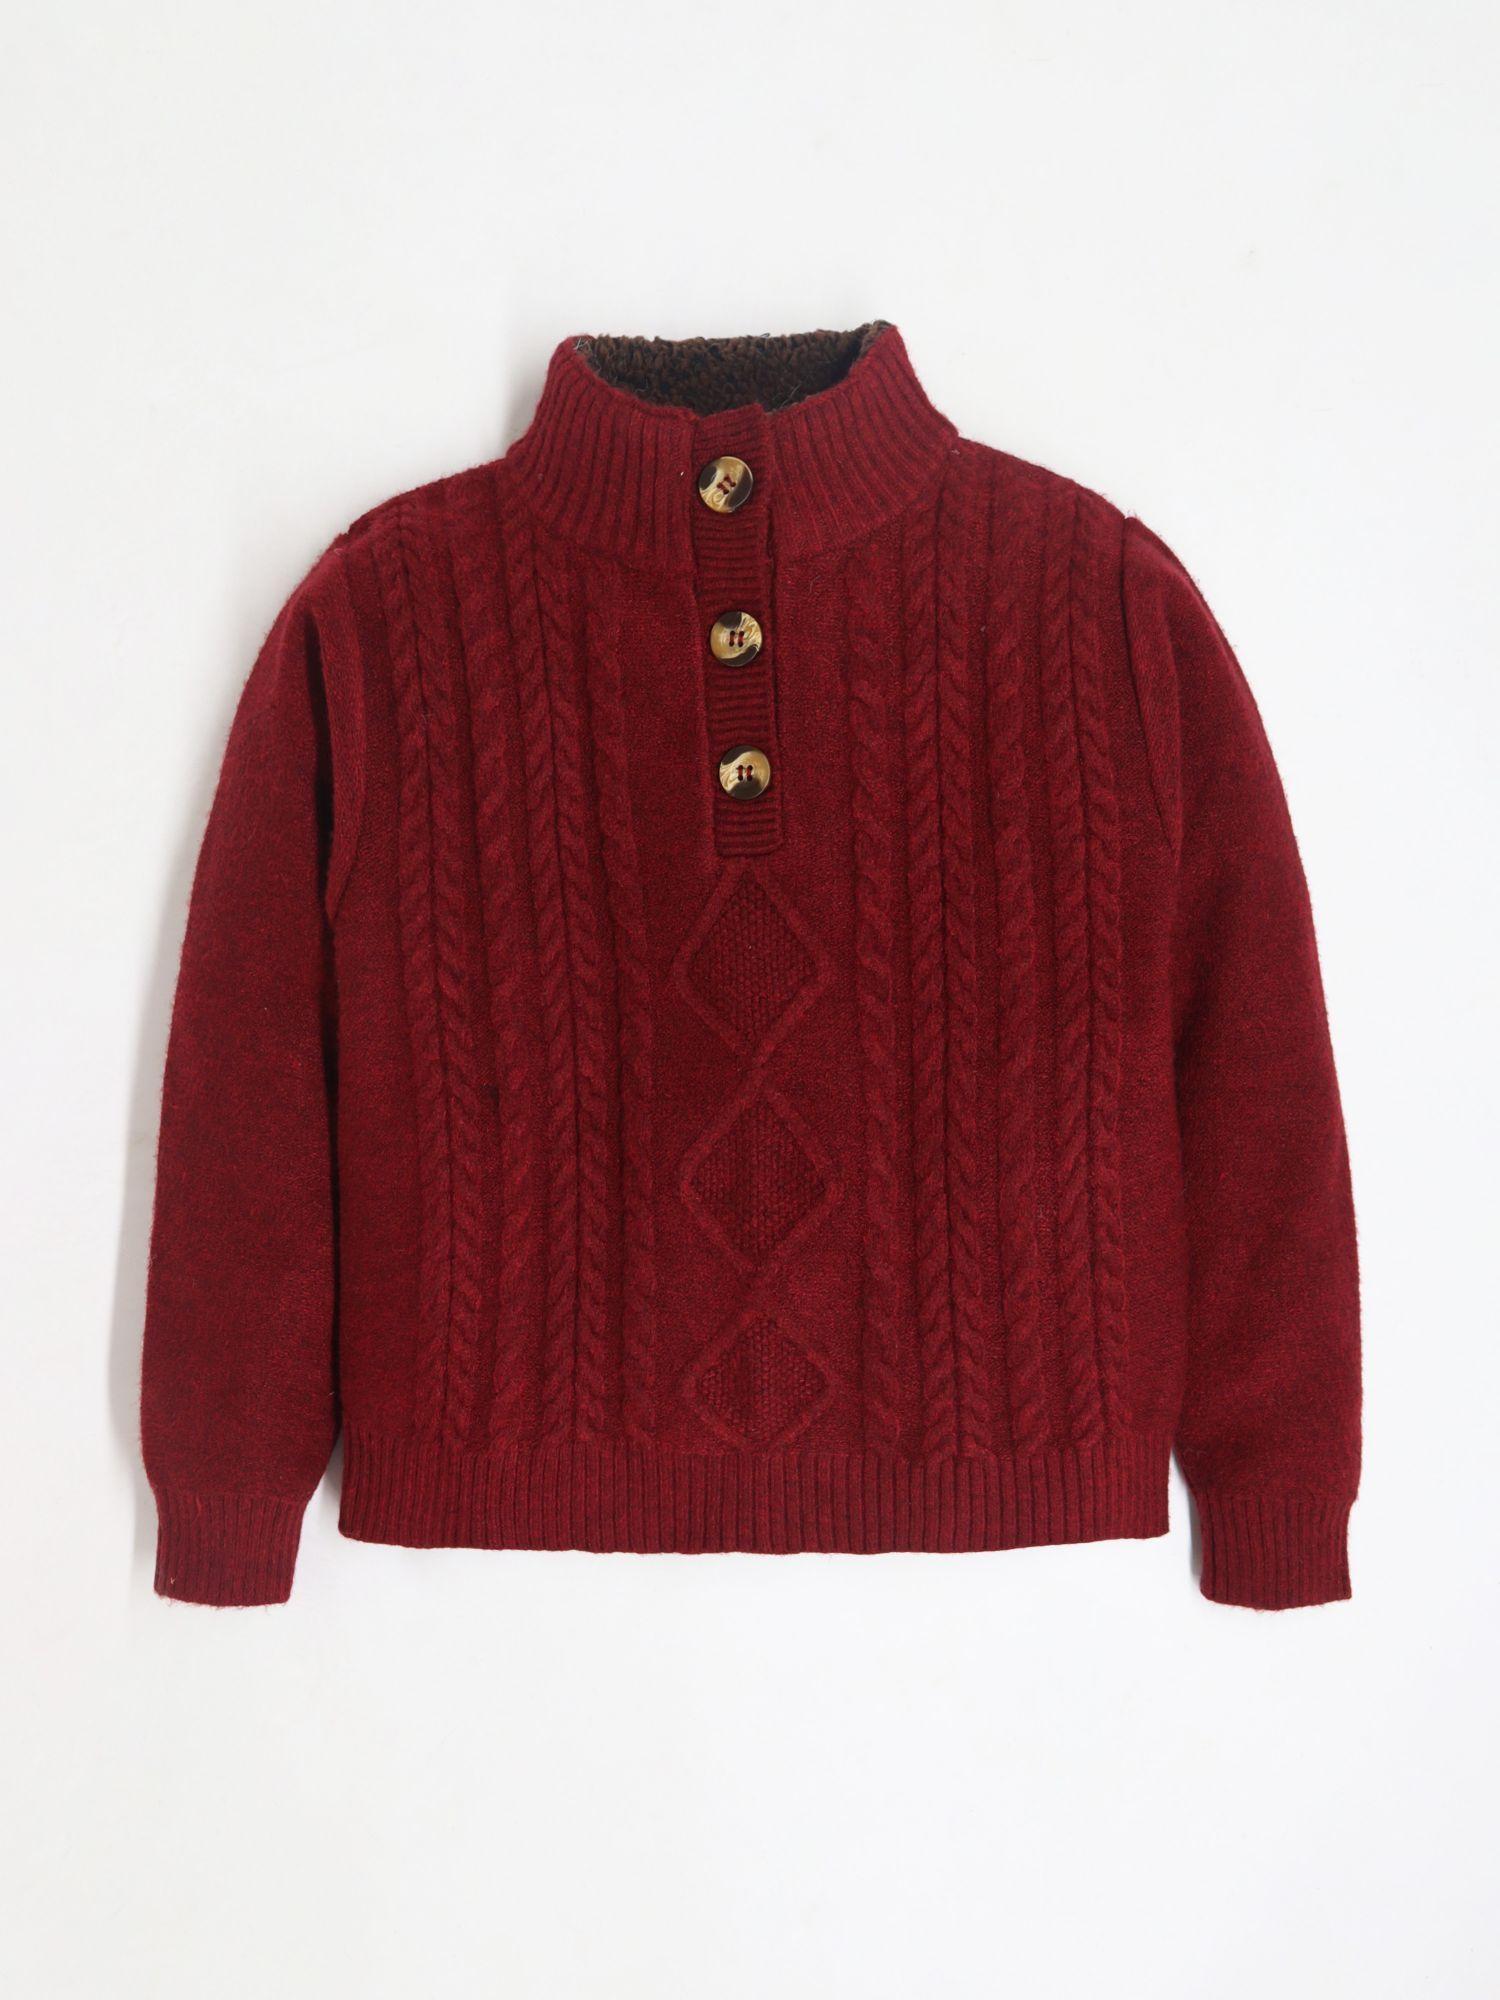 unisex high neck maroon sweater ultimate comfort & style